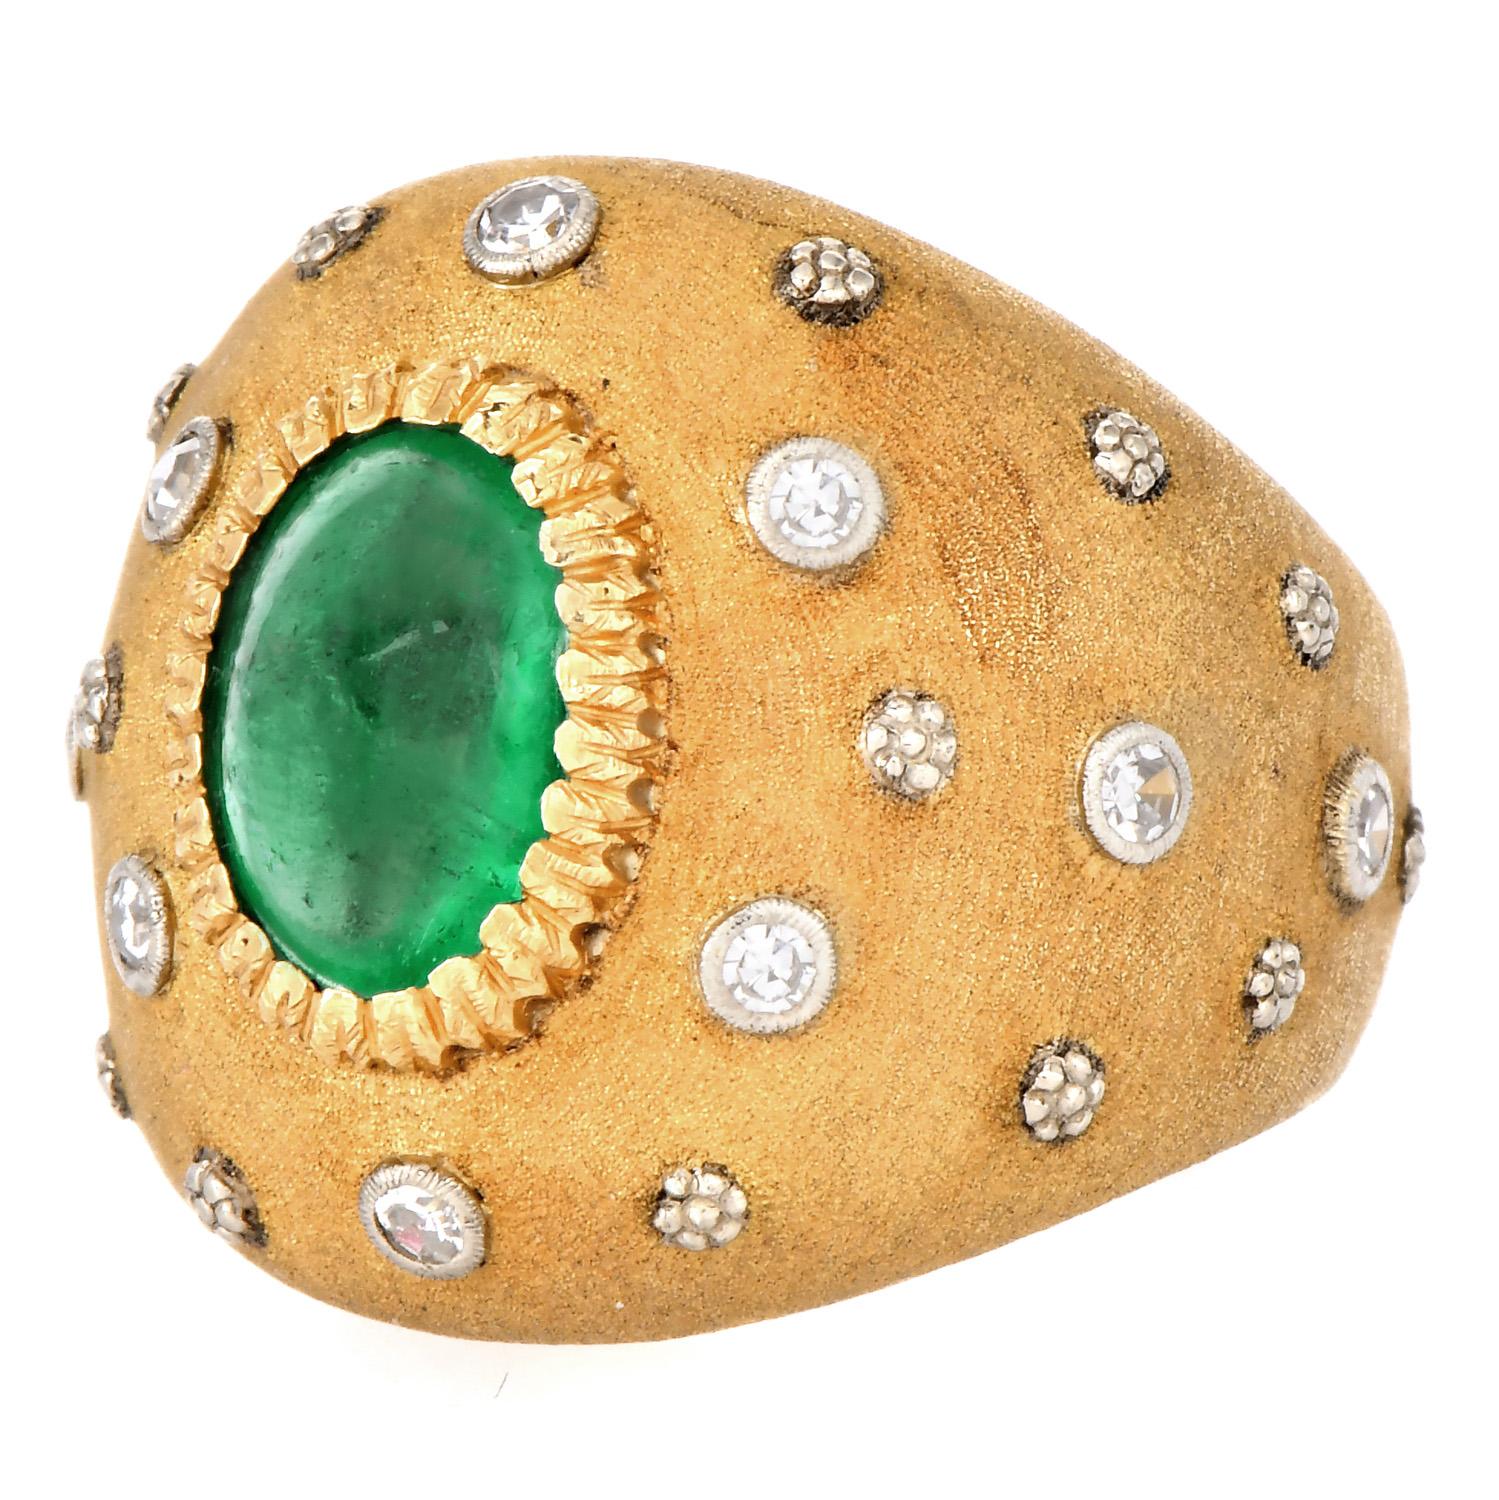 Vintage Buccellati Diamond Emerald Dome Cocktail Ring

Presenting a beautiful cocktail Dome Ring forged in 18K Yellow Gold from the house of Buccellati. The dome ring has satin-finished floral textured with a bezel set in white gold natural diamonds